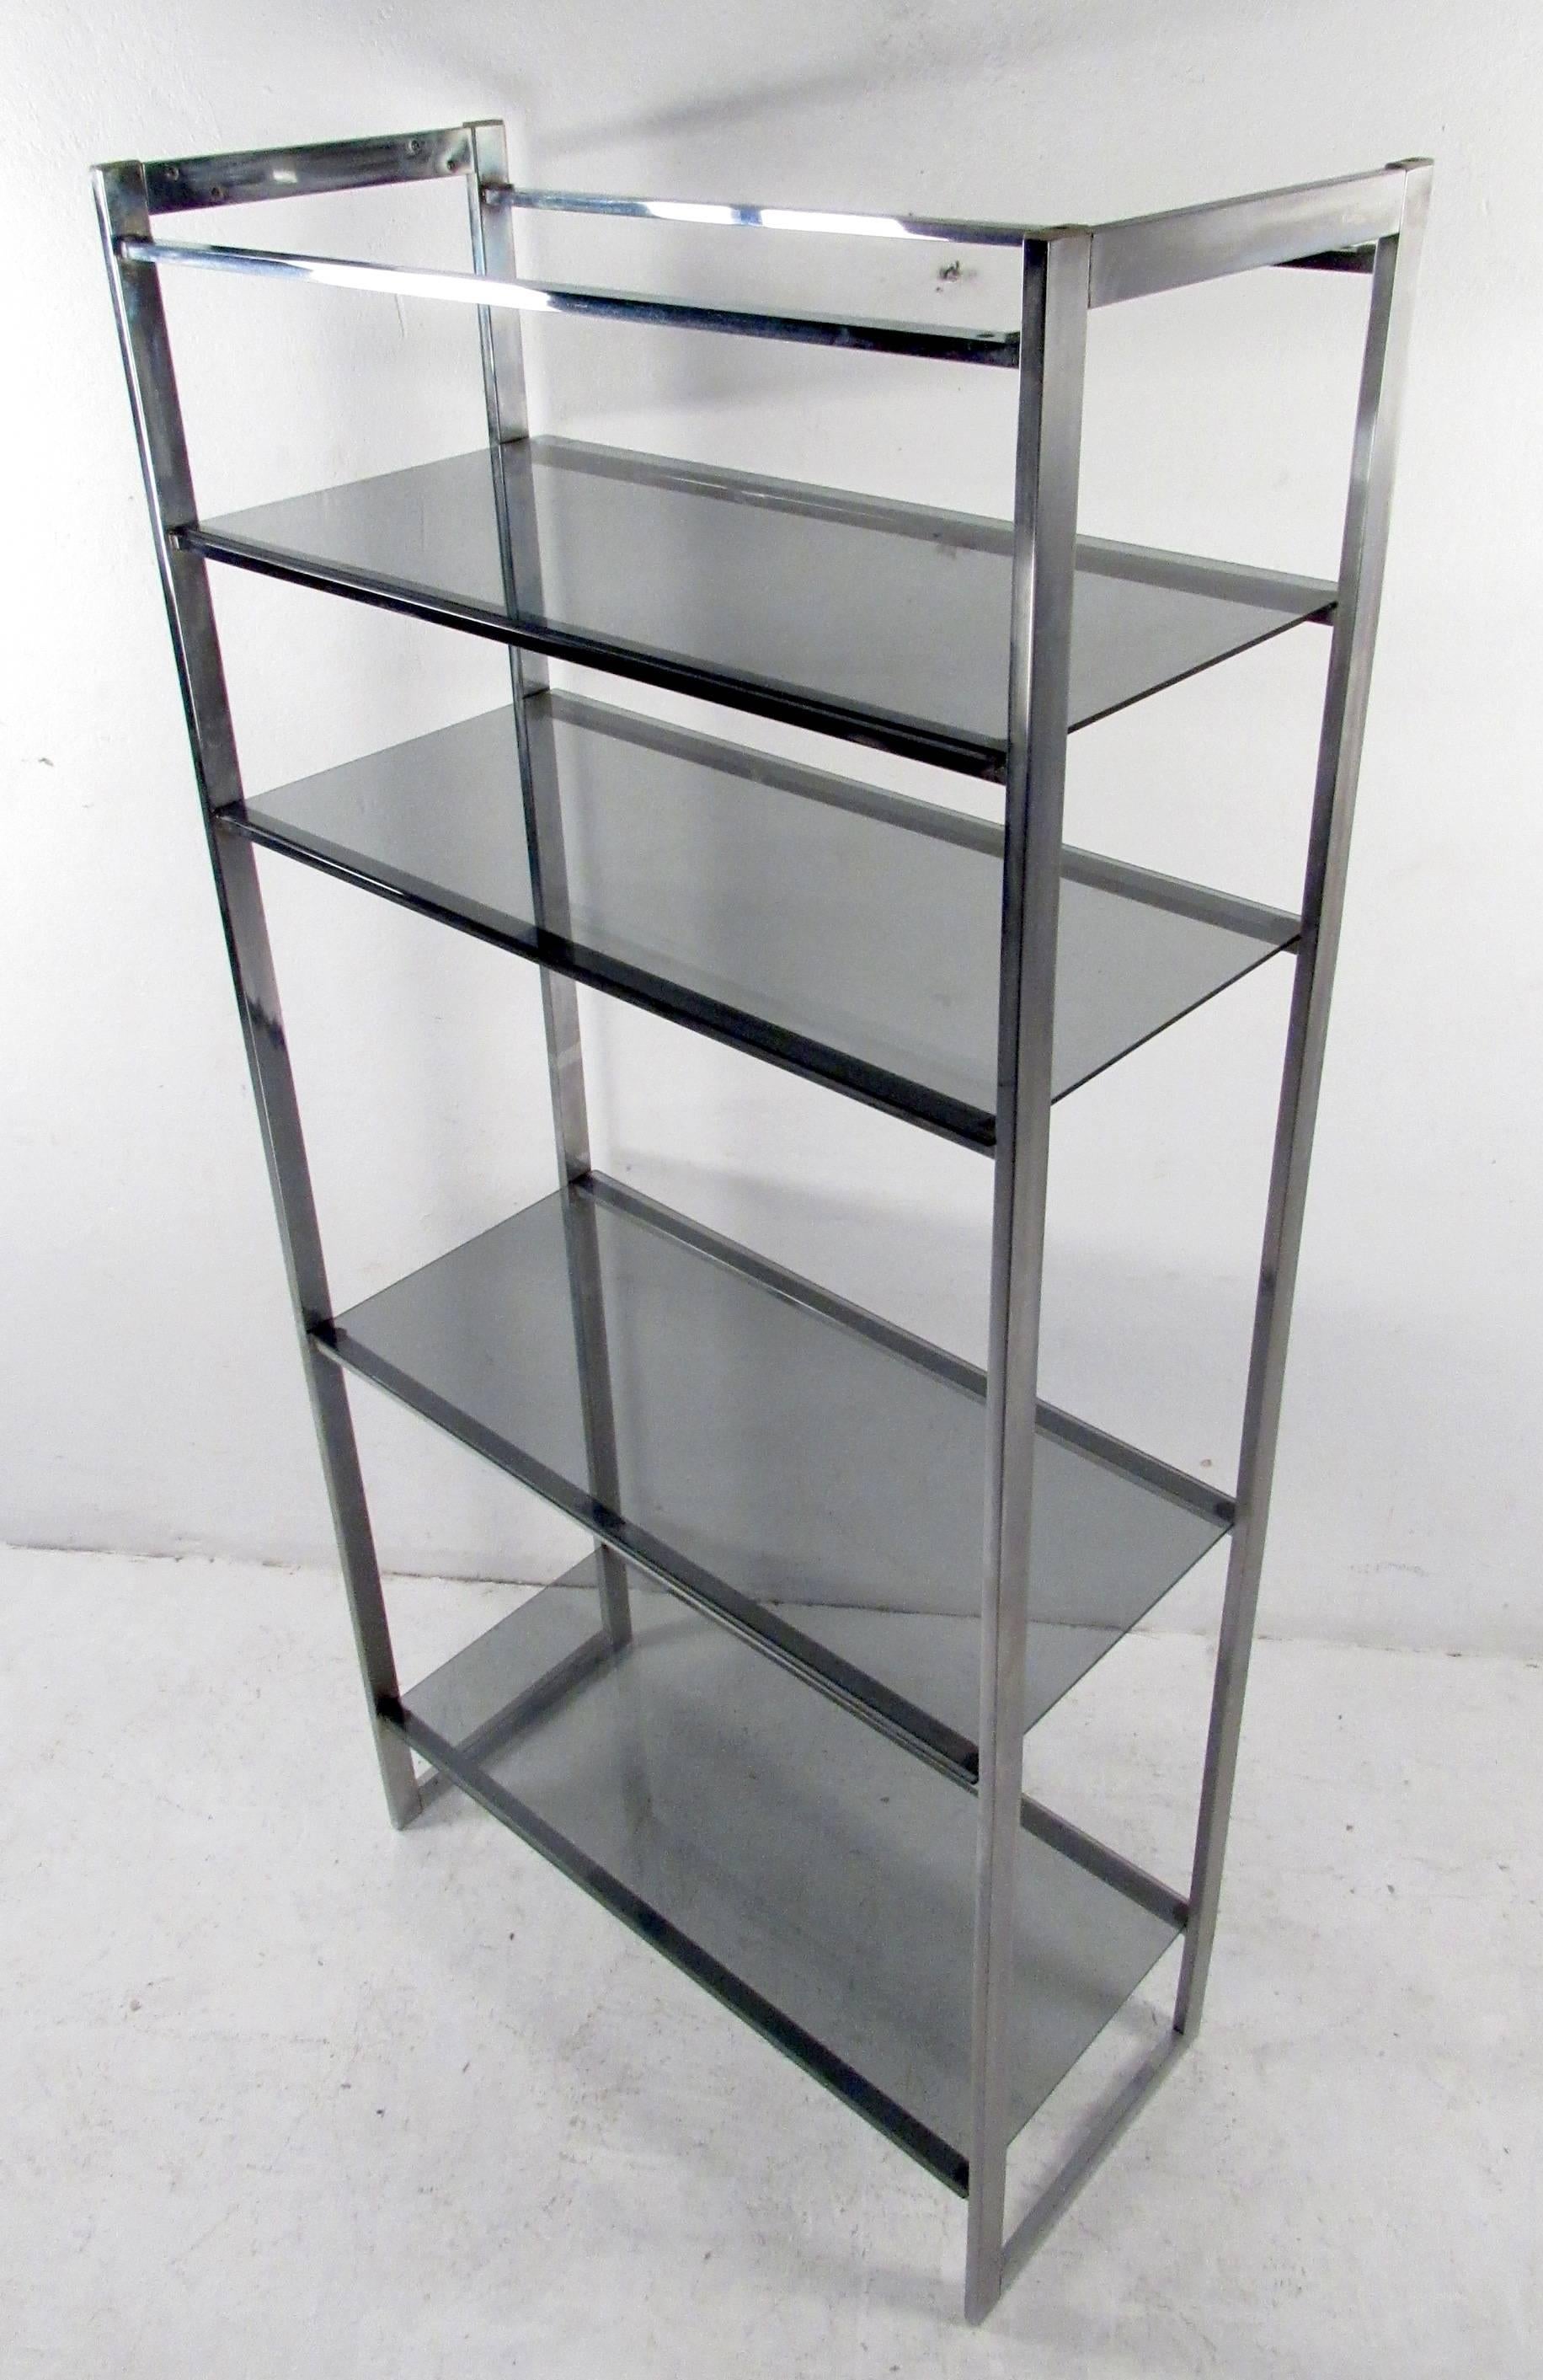 Vintage modern Milo Baughman bookshelf featuring chrome body with smoked glass shelving. Ideal mid-century etagere for shop display or home storage. 

Please confirm item location NY or NJ with dealer.